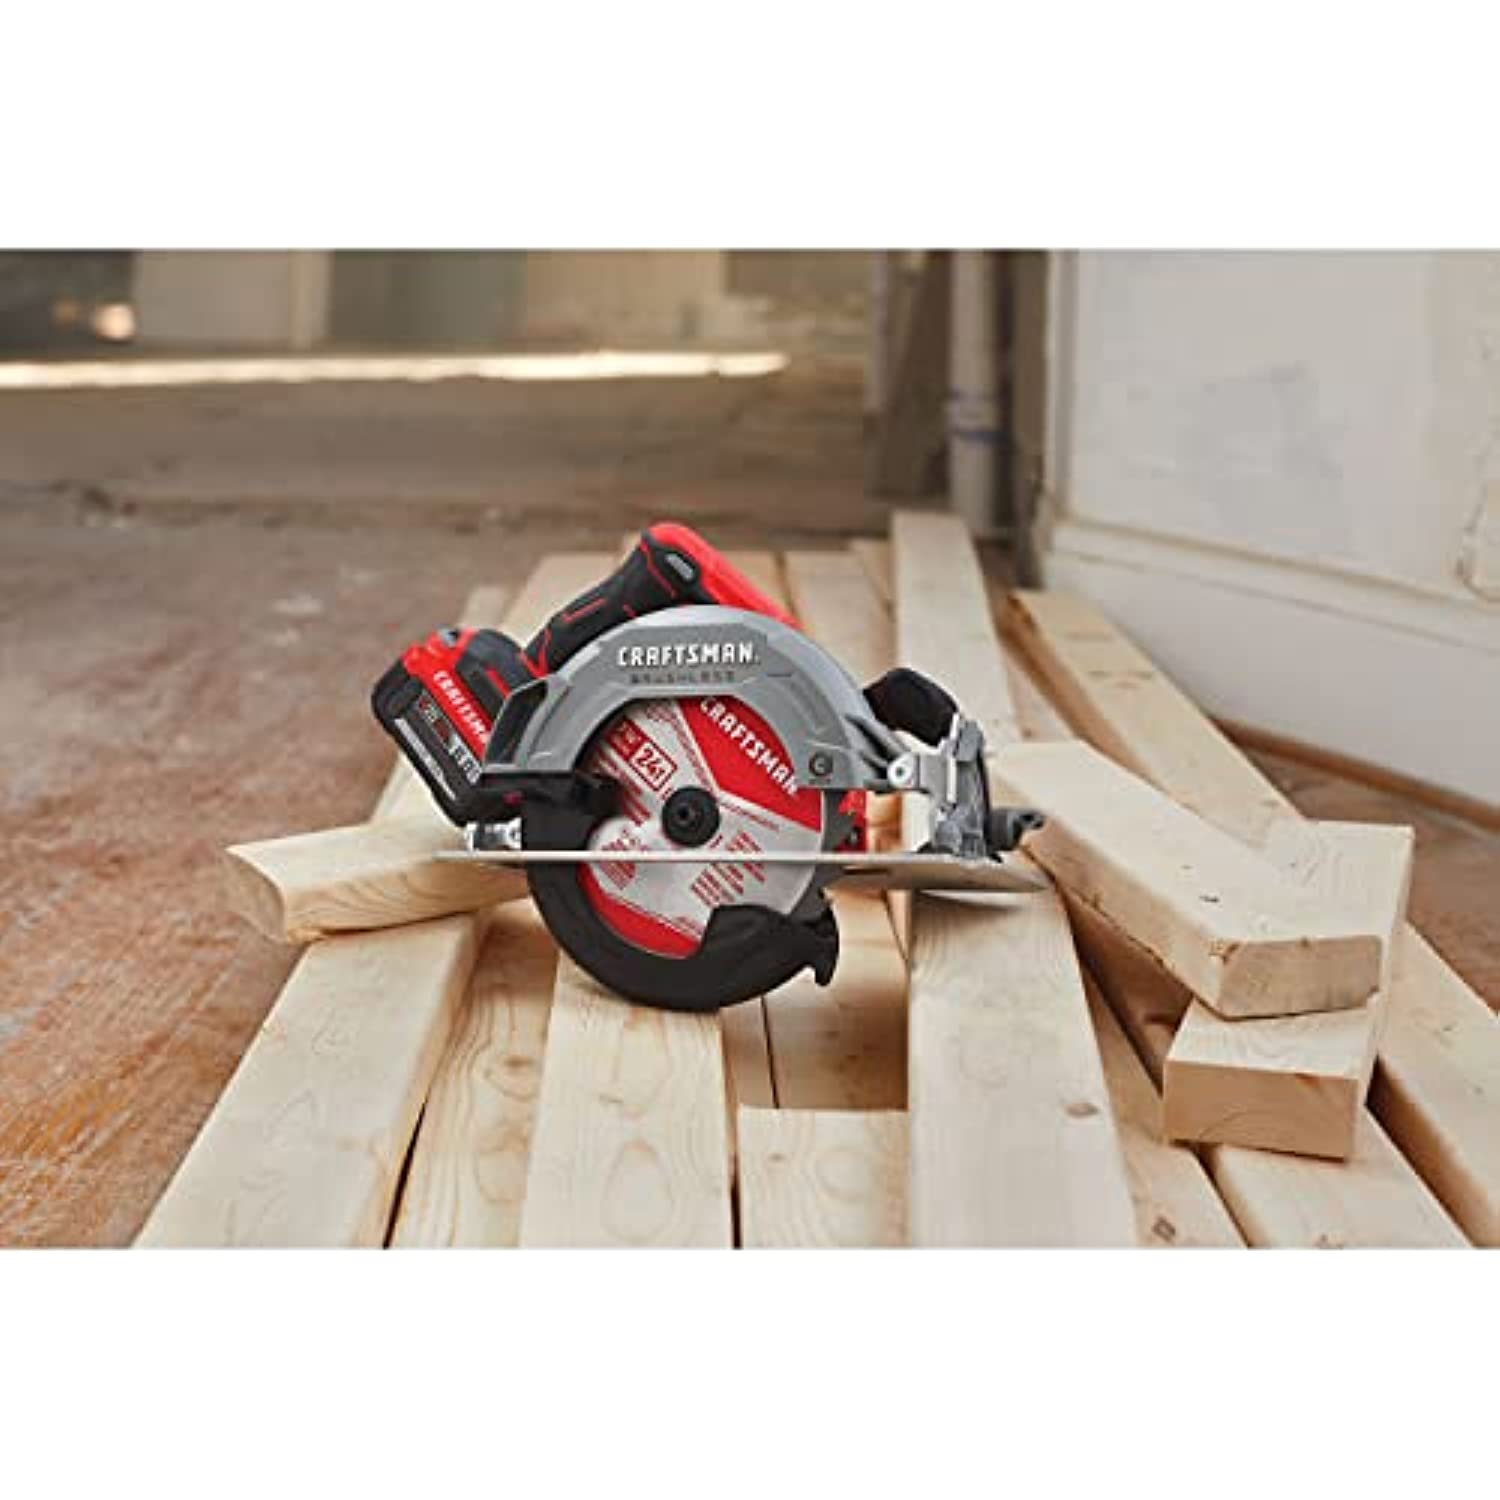 Craftsman V20 20 volt 7-1/4 in. Cordless Brushless Circular Saw Tool Only  Case Of: 1;